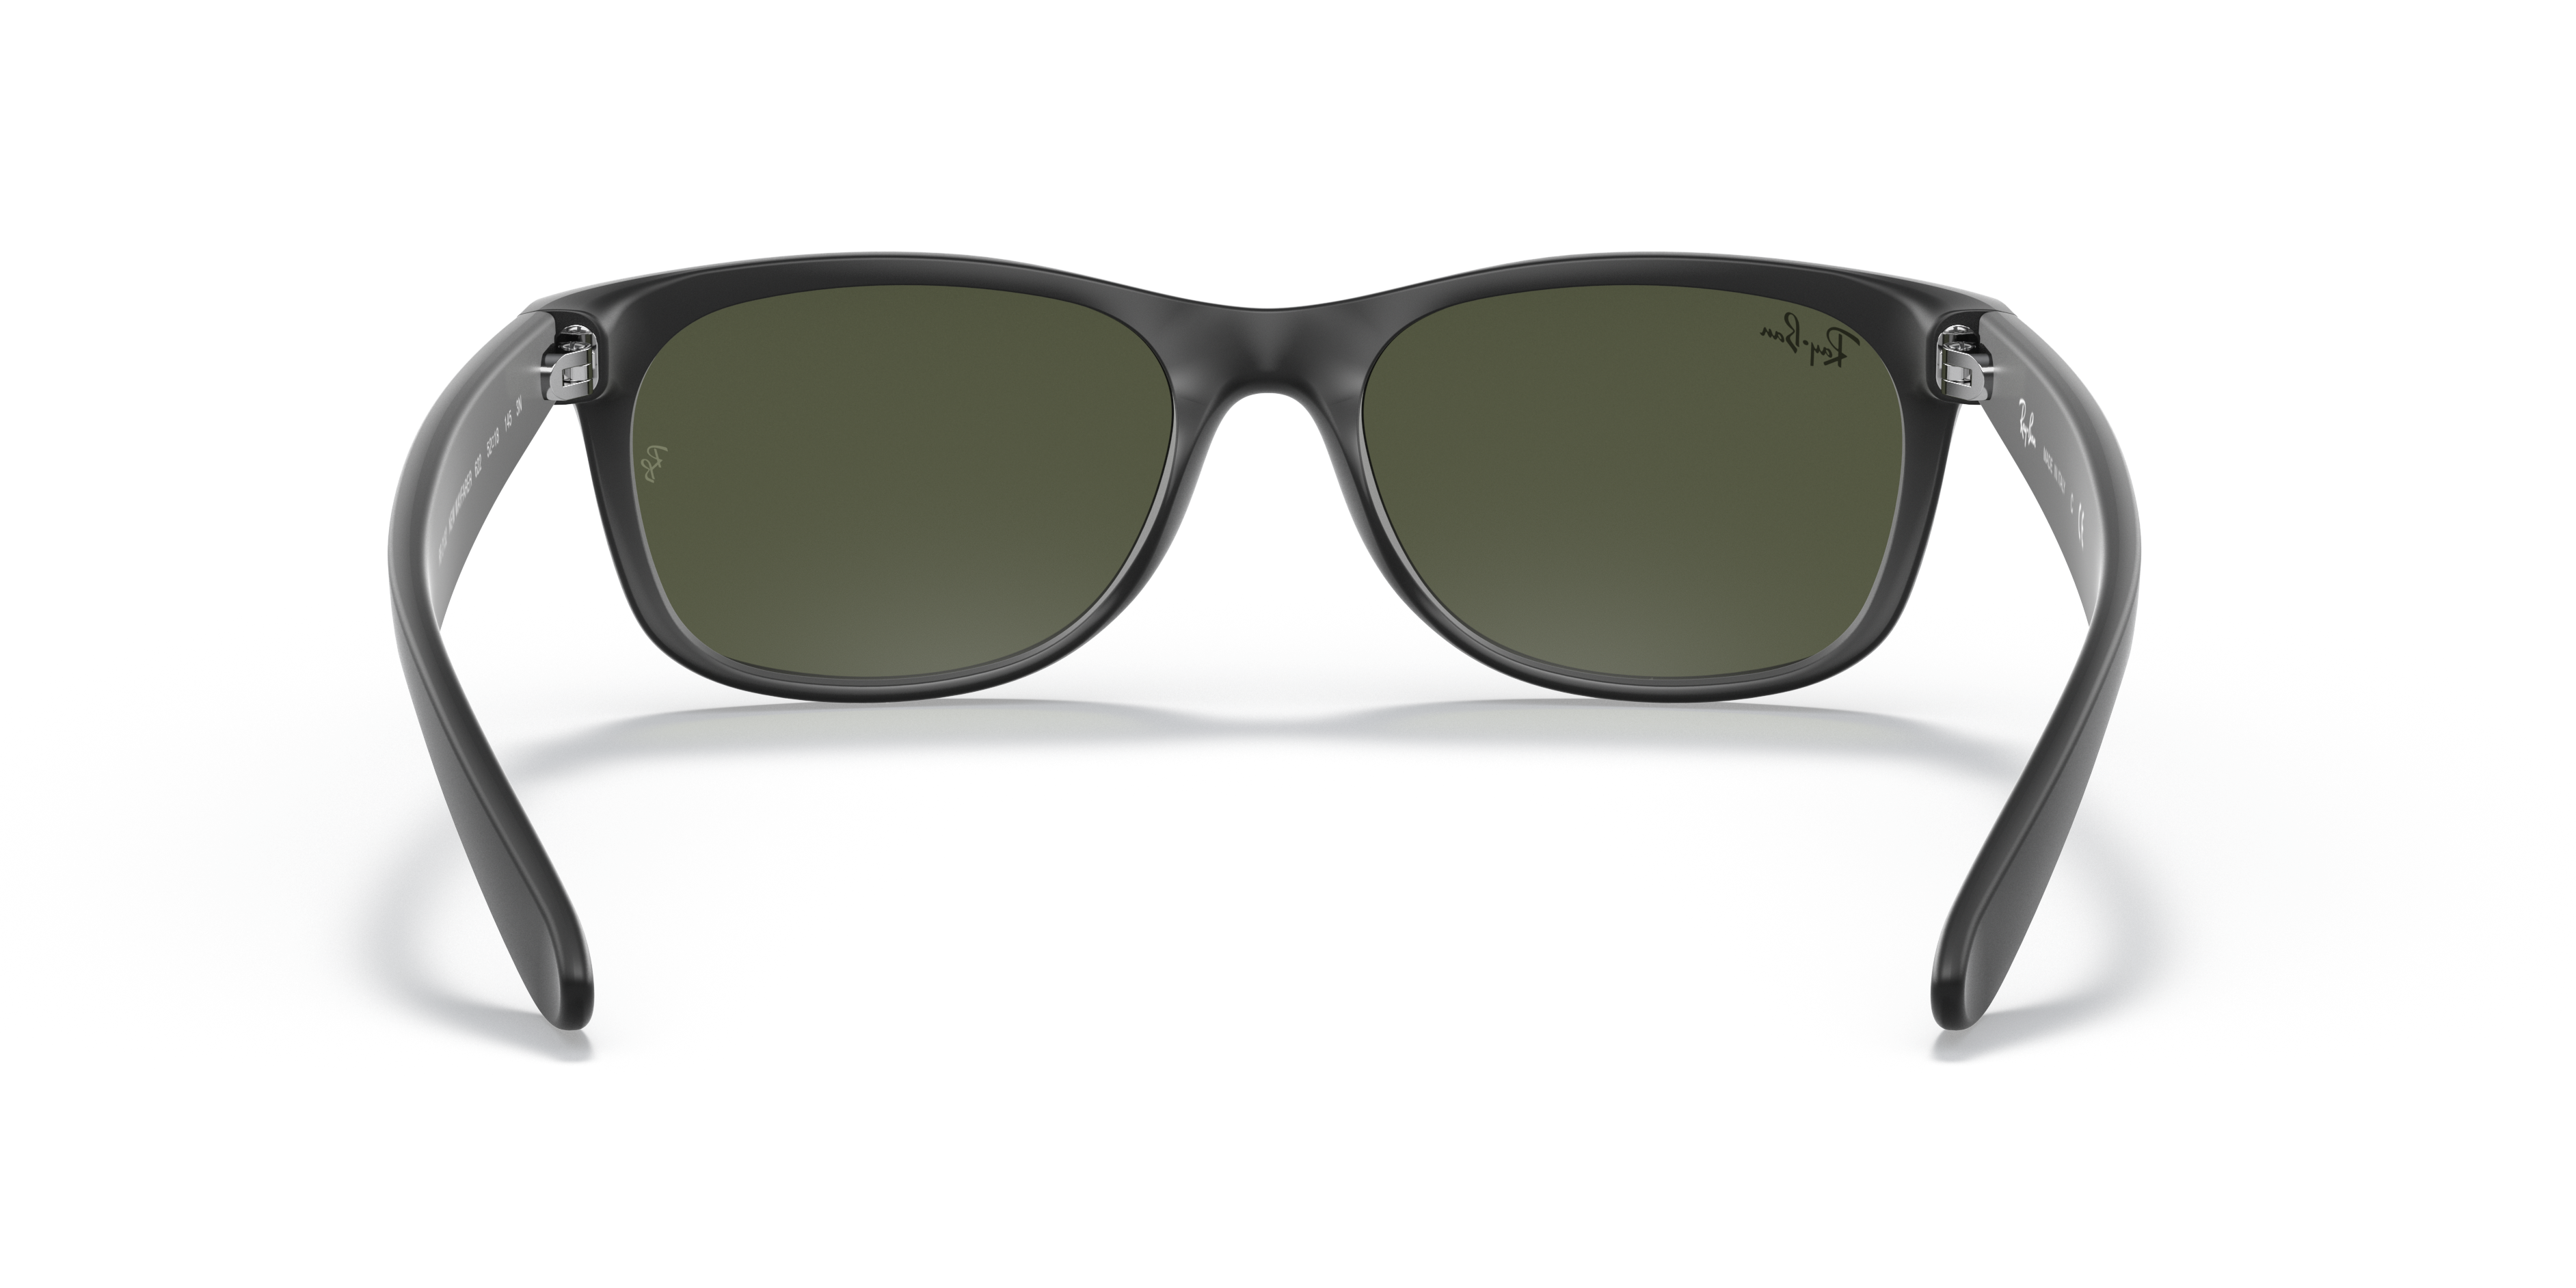 New Wayfarer Classic Sunglasses in Rubber Black and Green | Ray-Ban®